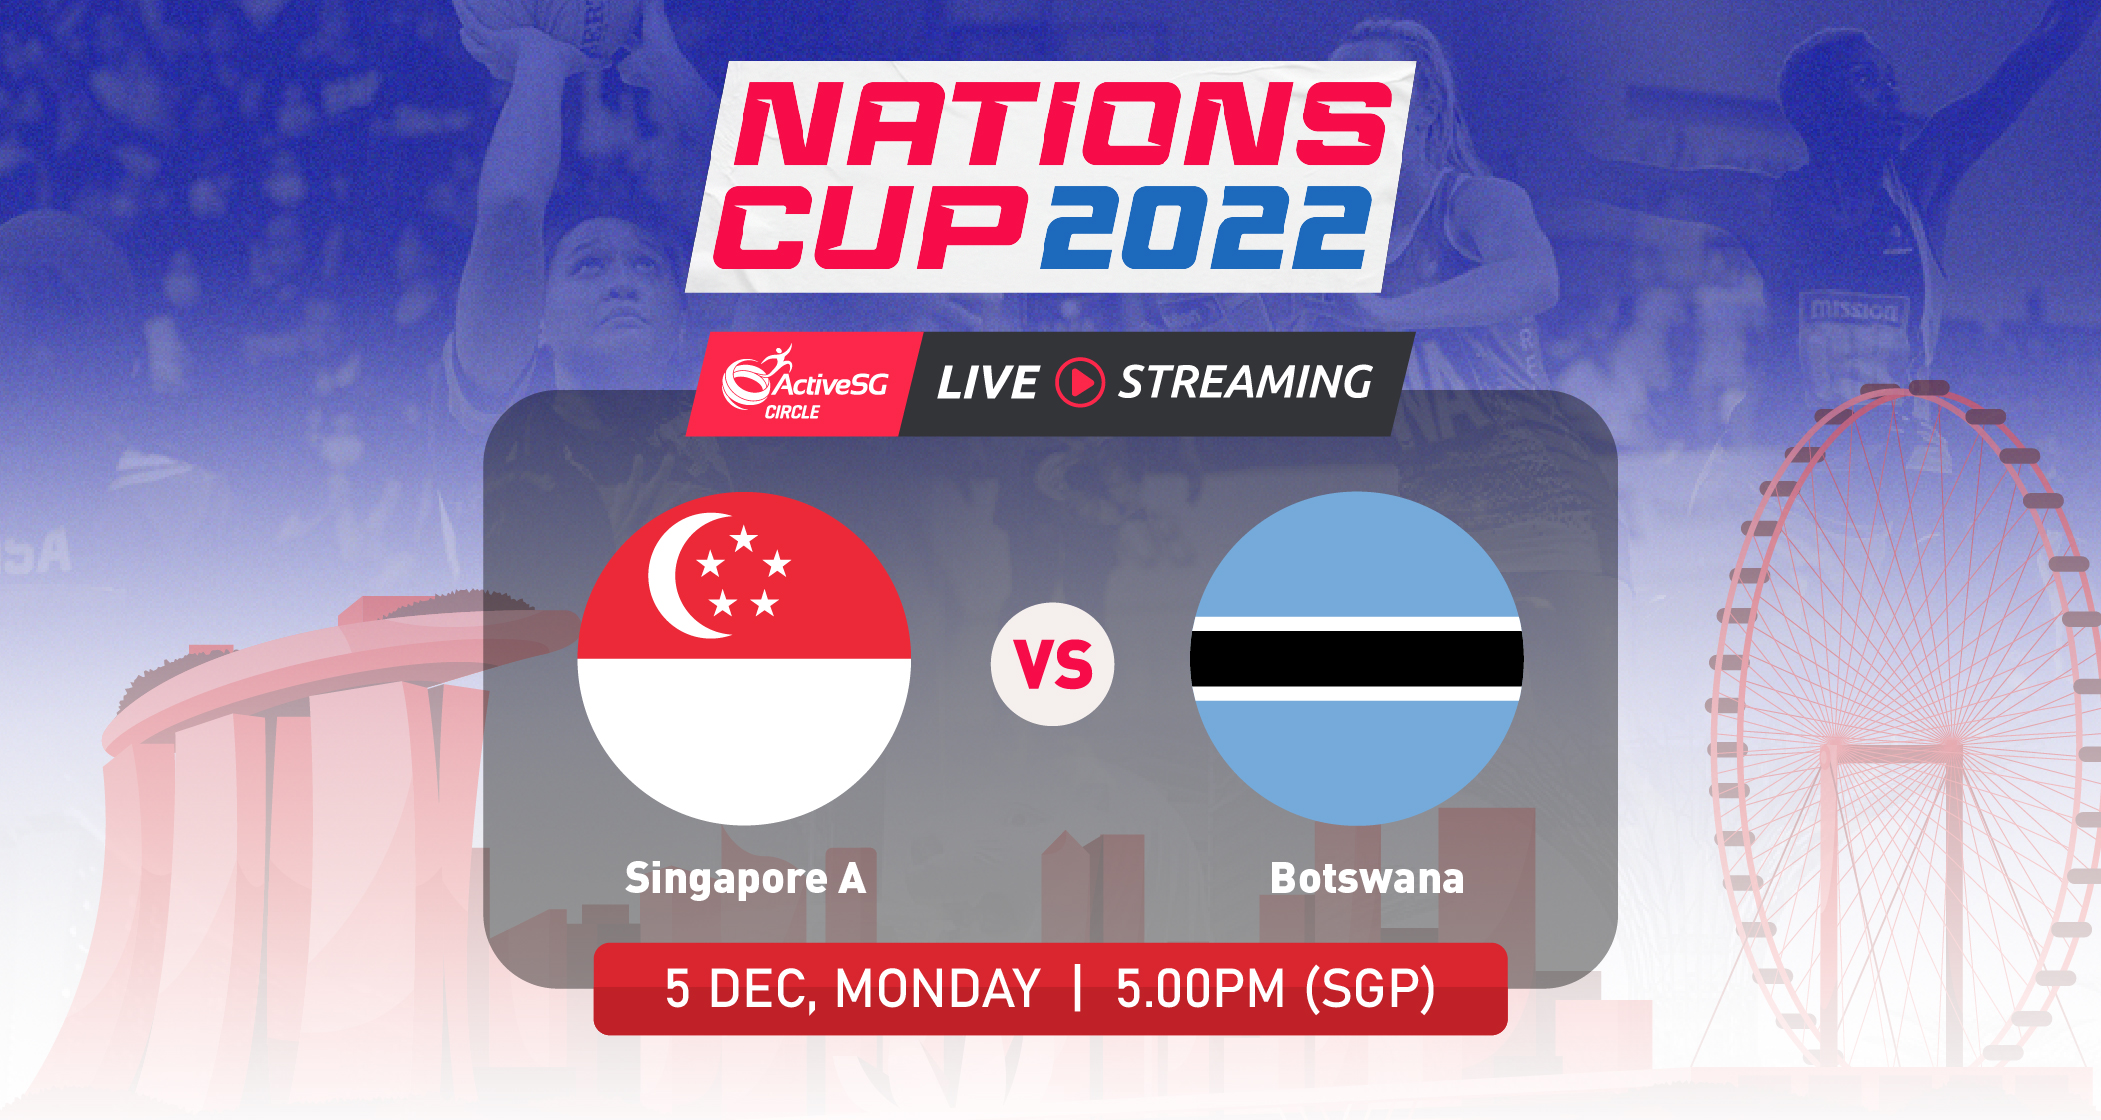 🔴 LIVE: Singapore A 🇸🇬 vs 🇧🇼 Botswana | Nations Cup 2022